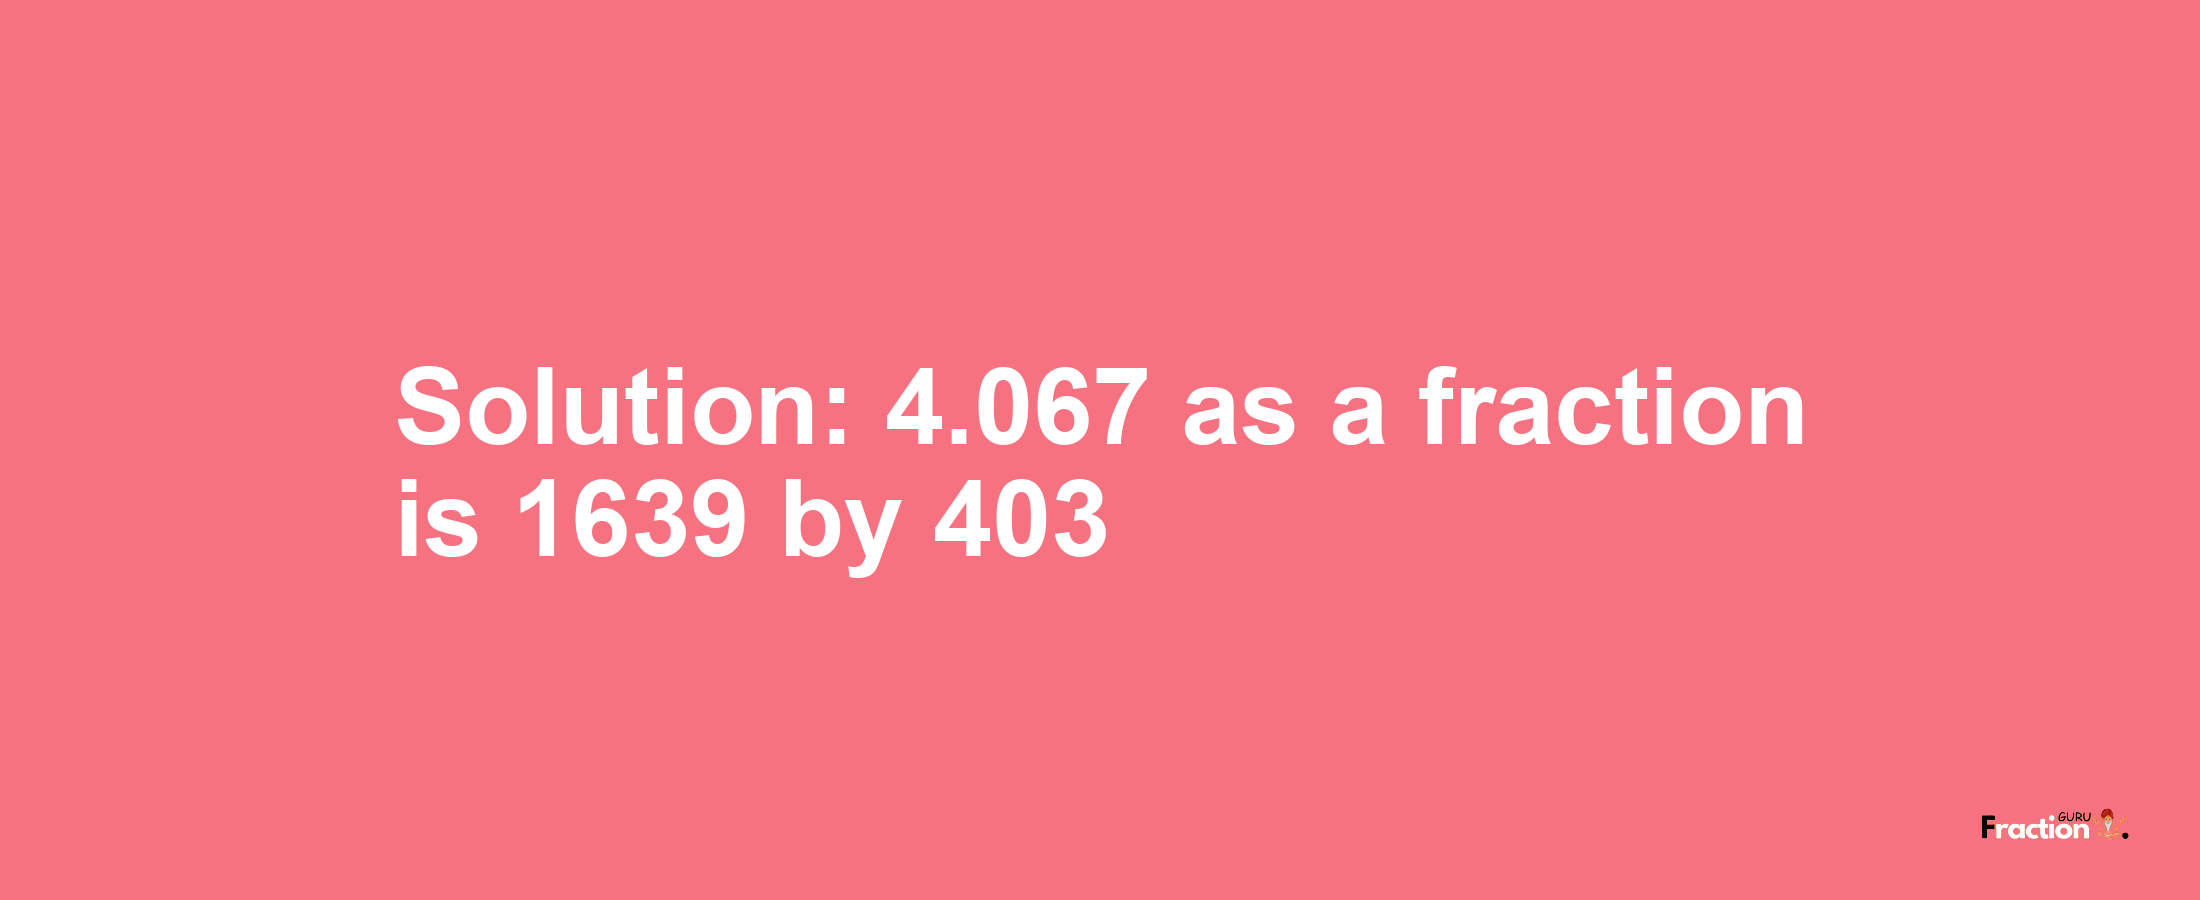 Solution:4.067 as a fraction is 1639/403